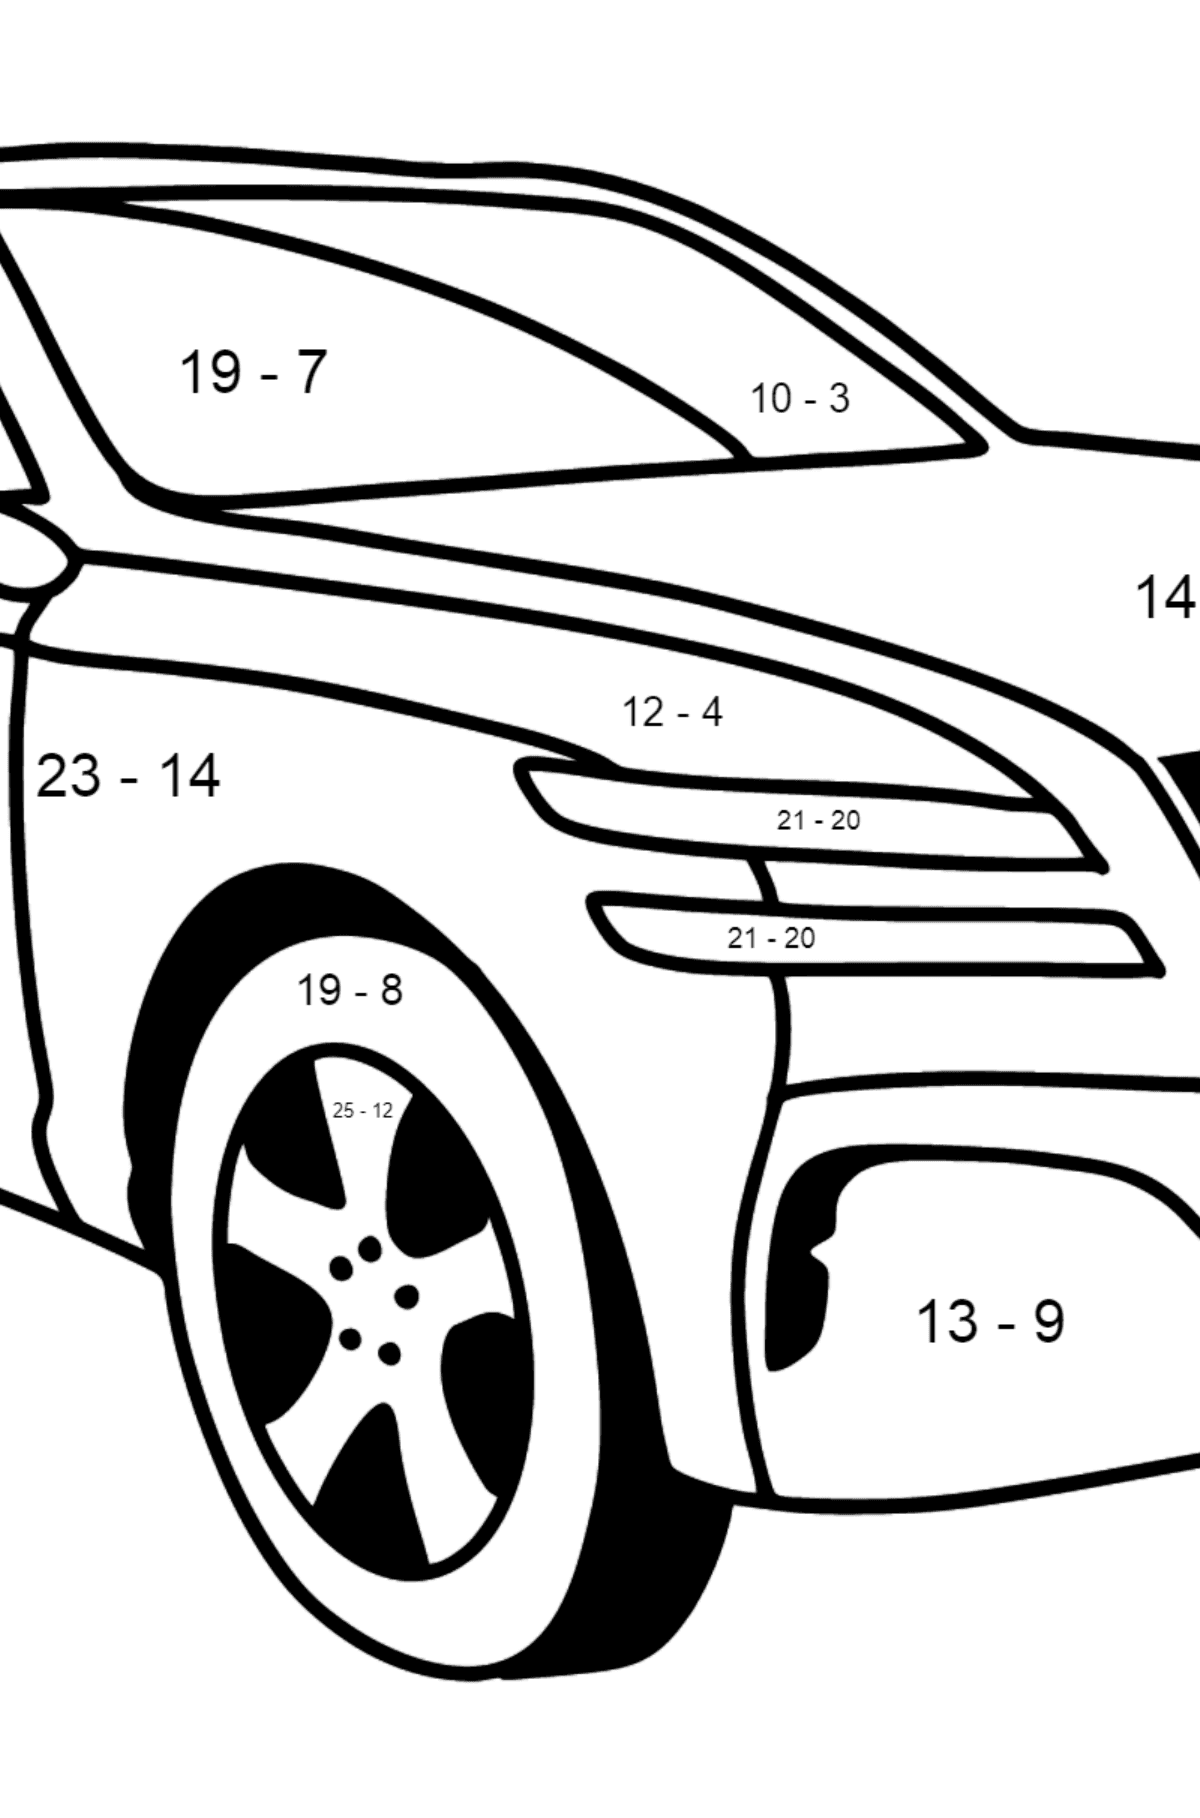 Genesis car coloring page - Math Coloring - Subtraction for Kids